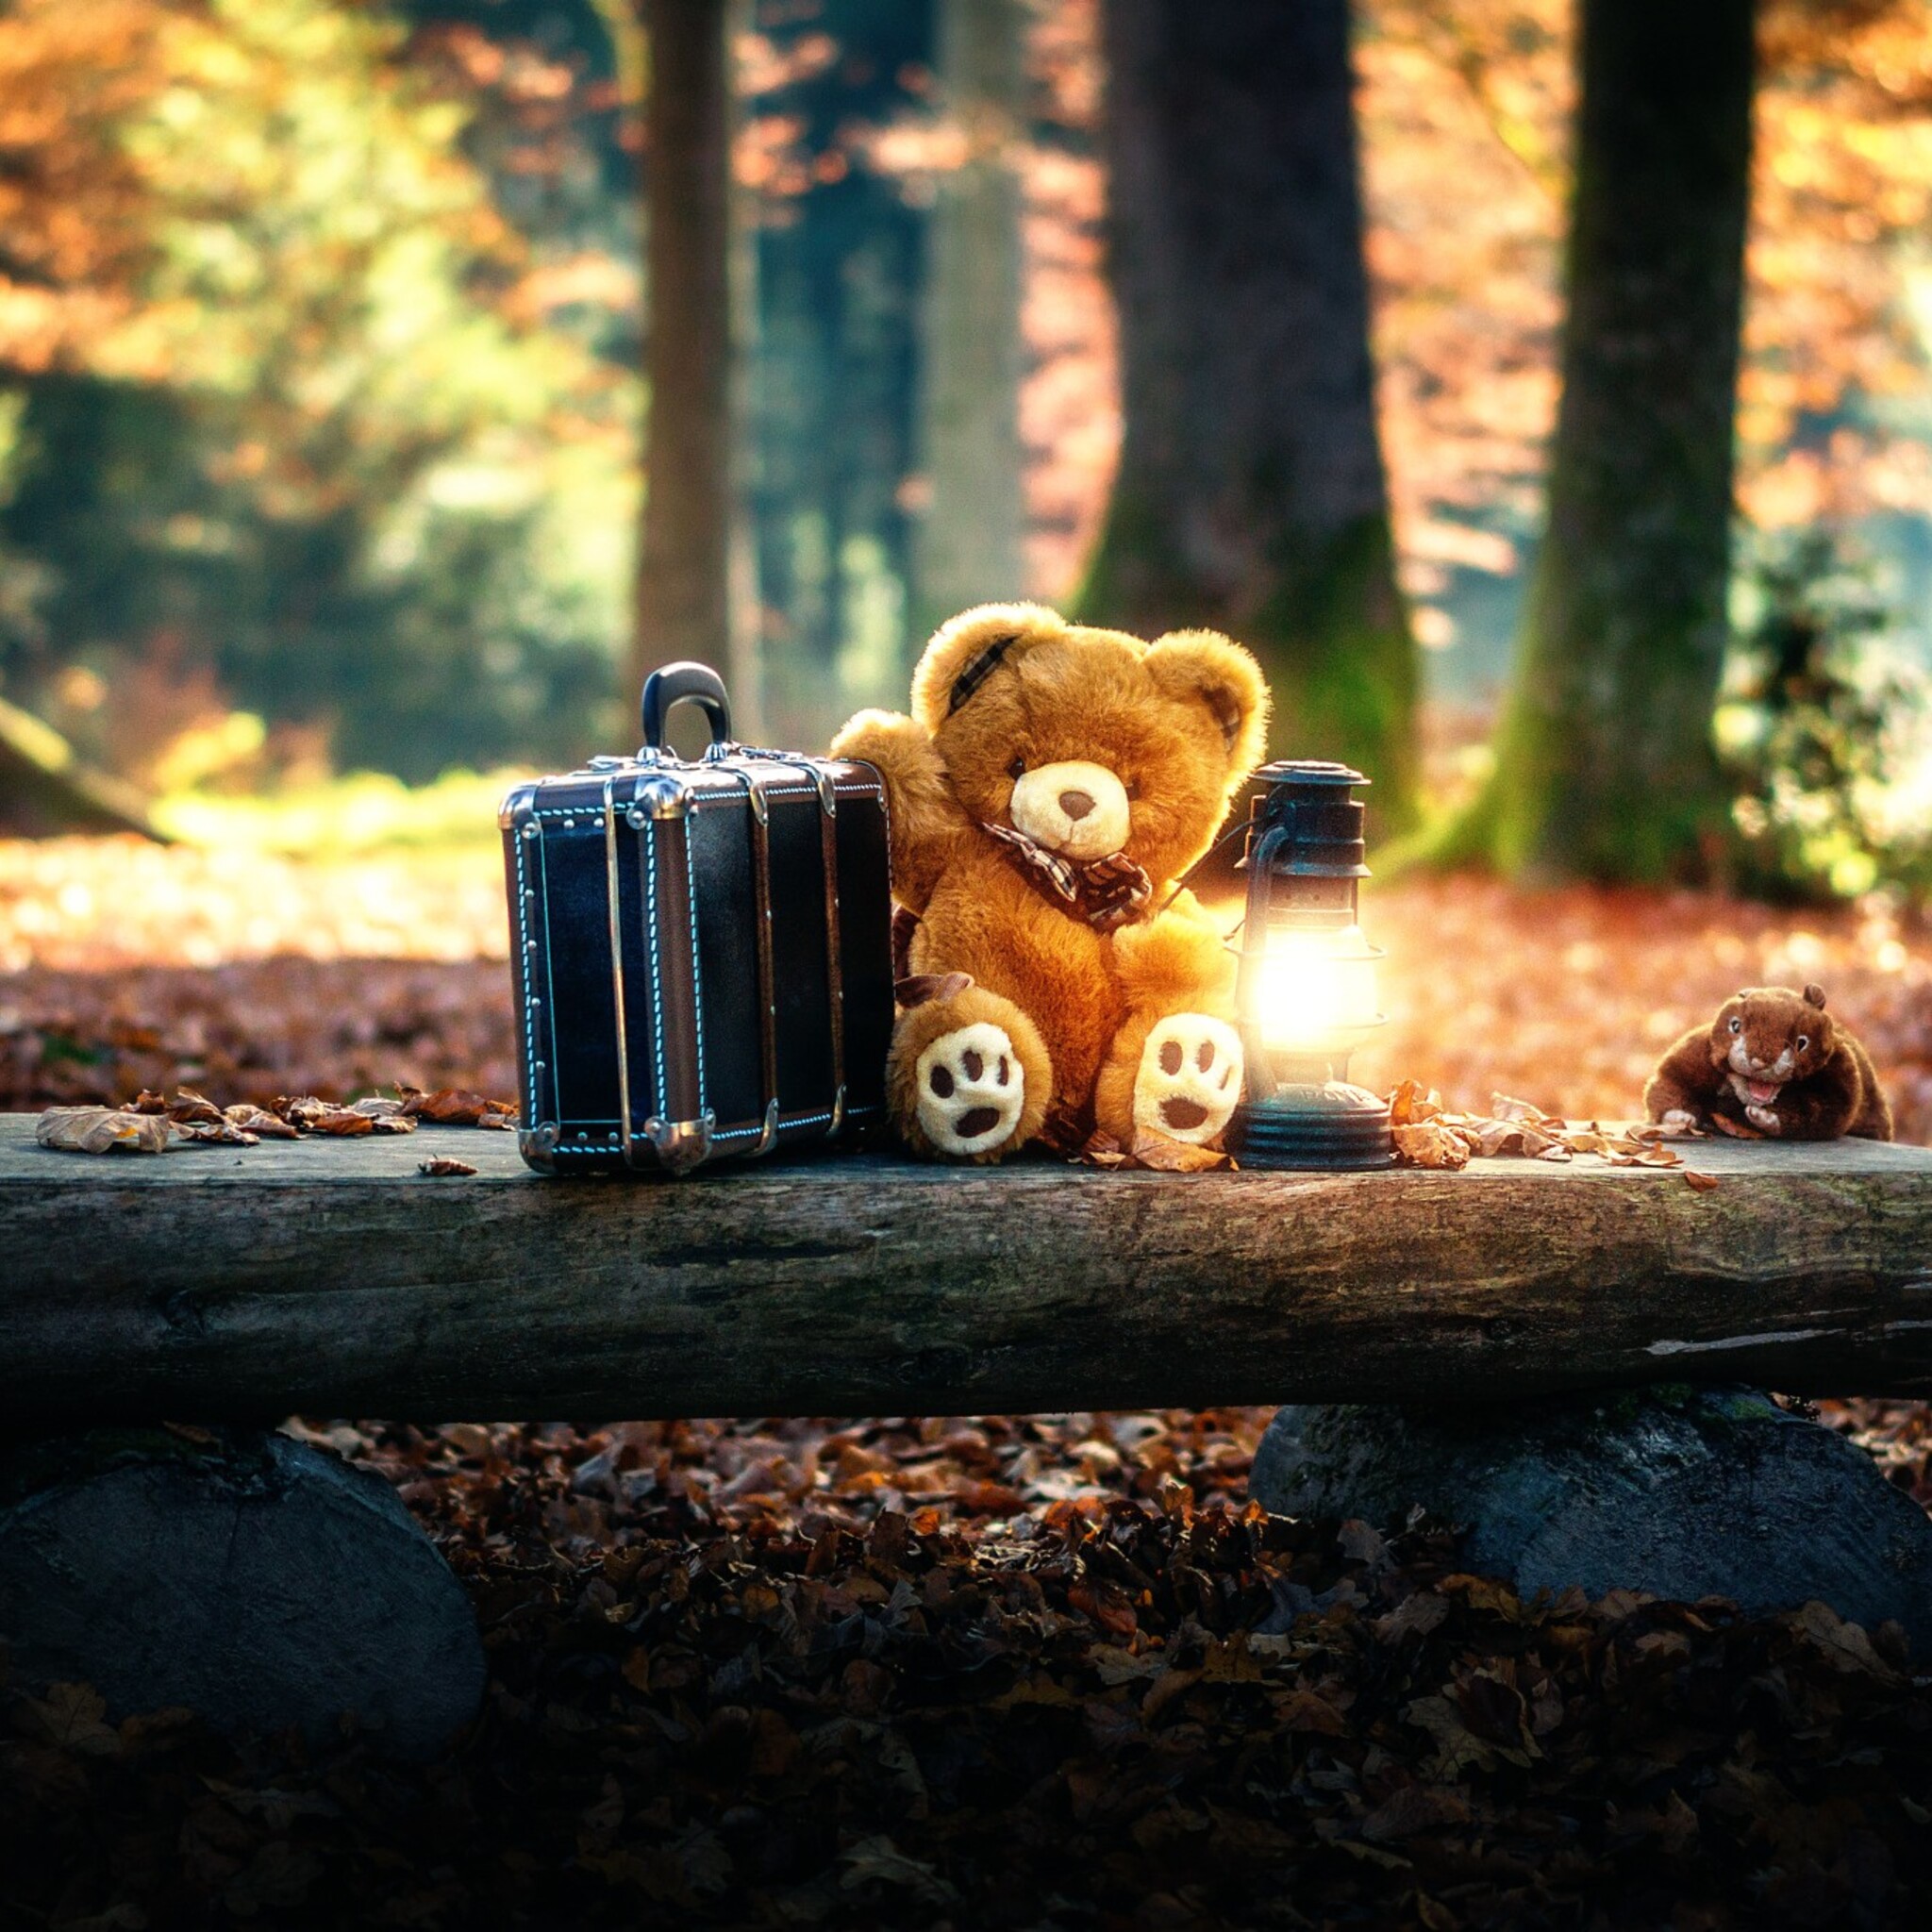 Teddy Bears Cute Alone in Forest iPad Air HD 4k Wallpaper, Image, Background, Photo and Picture